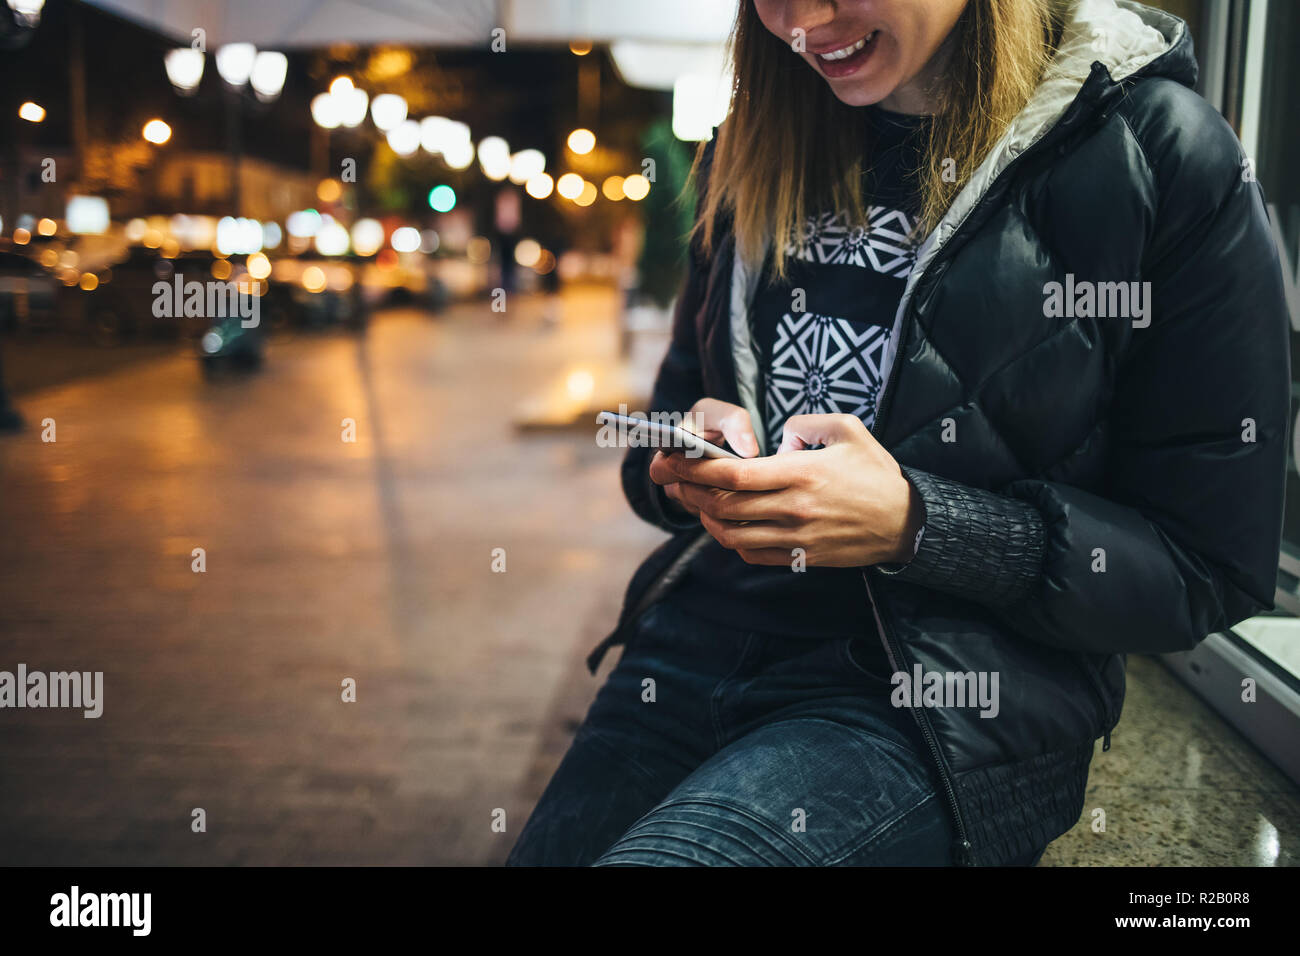 Happy young woman on street using mobile phone and smiles looking down at glowing screen, lights of night city on background. Stock Photo